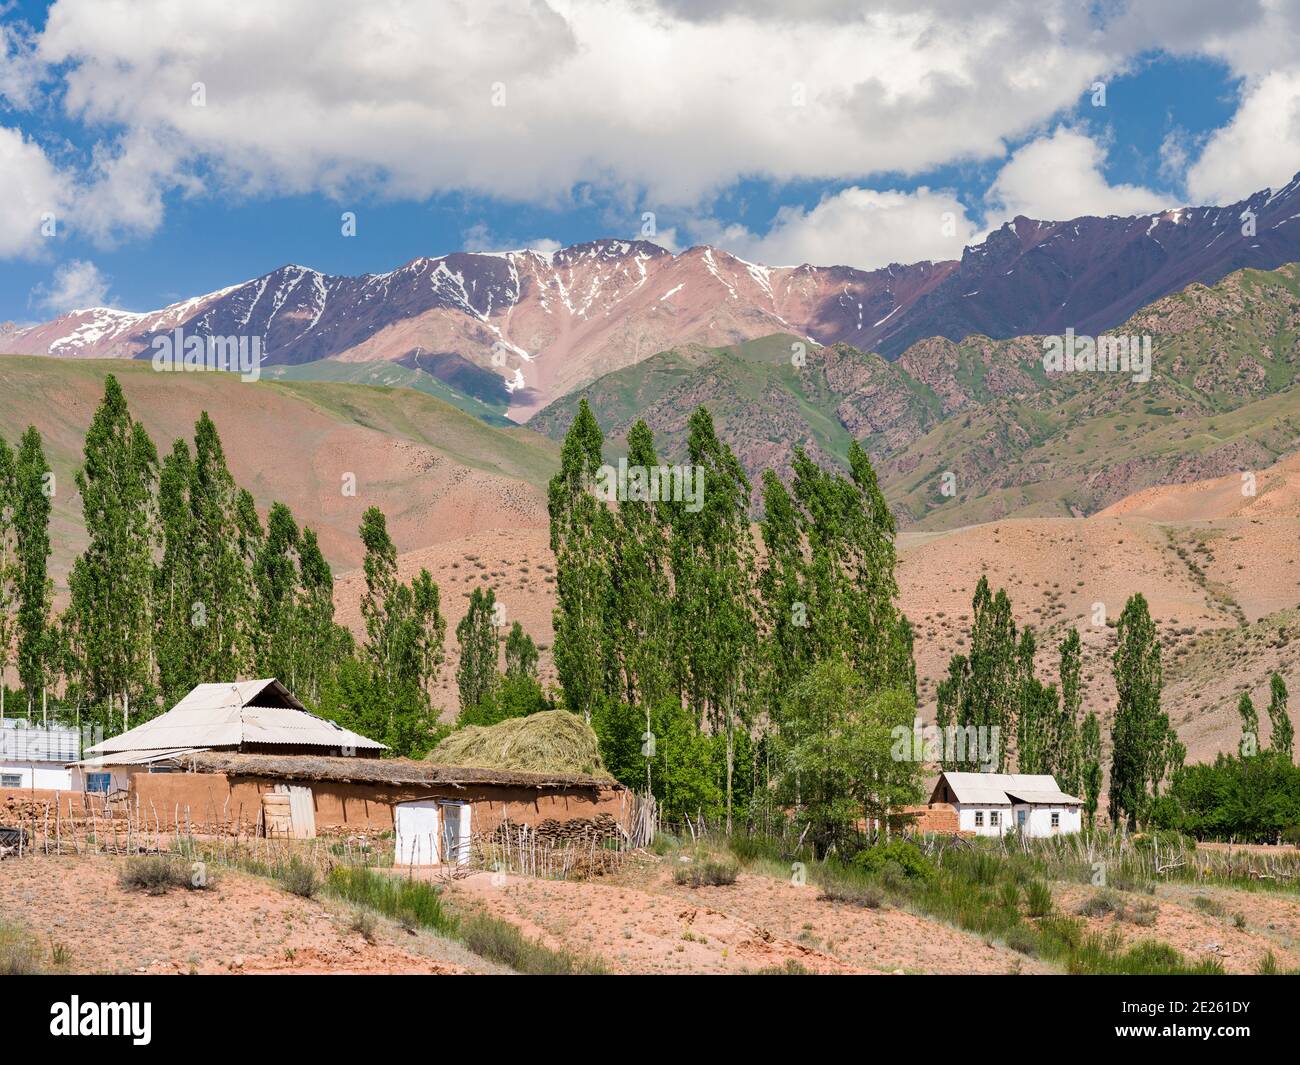 Village Kyzyl-Oy.  Valley of river Suusamyr in the Tien Shan Mountains.  Asia, central Asia, Kyrgyzstan Stock Photo